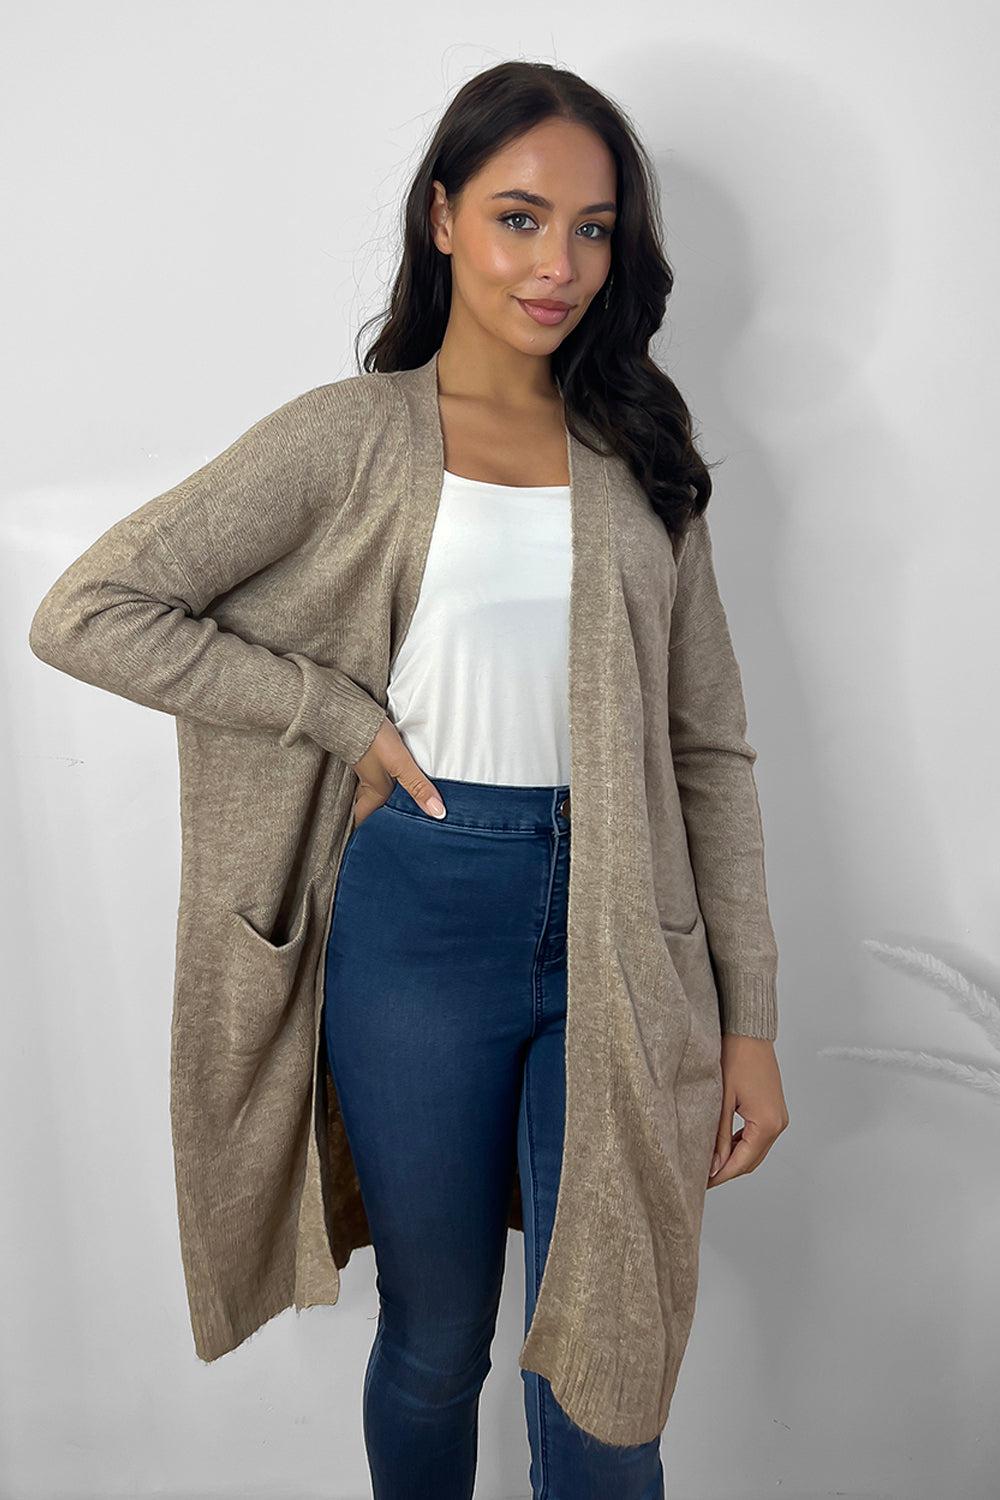 Slip Pockets To Side Open Front Batwing Cardigan-SinglePrice